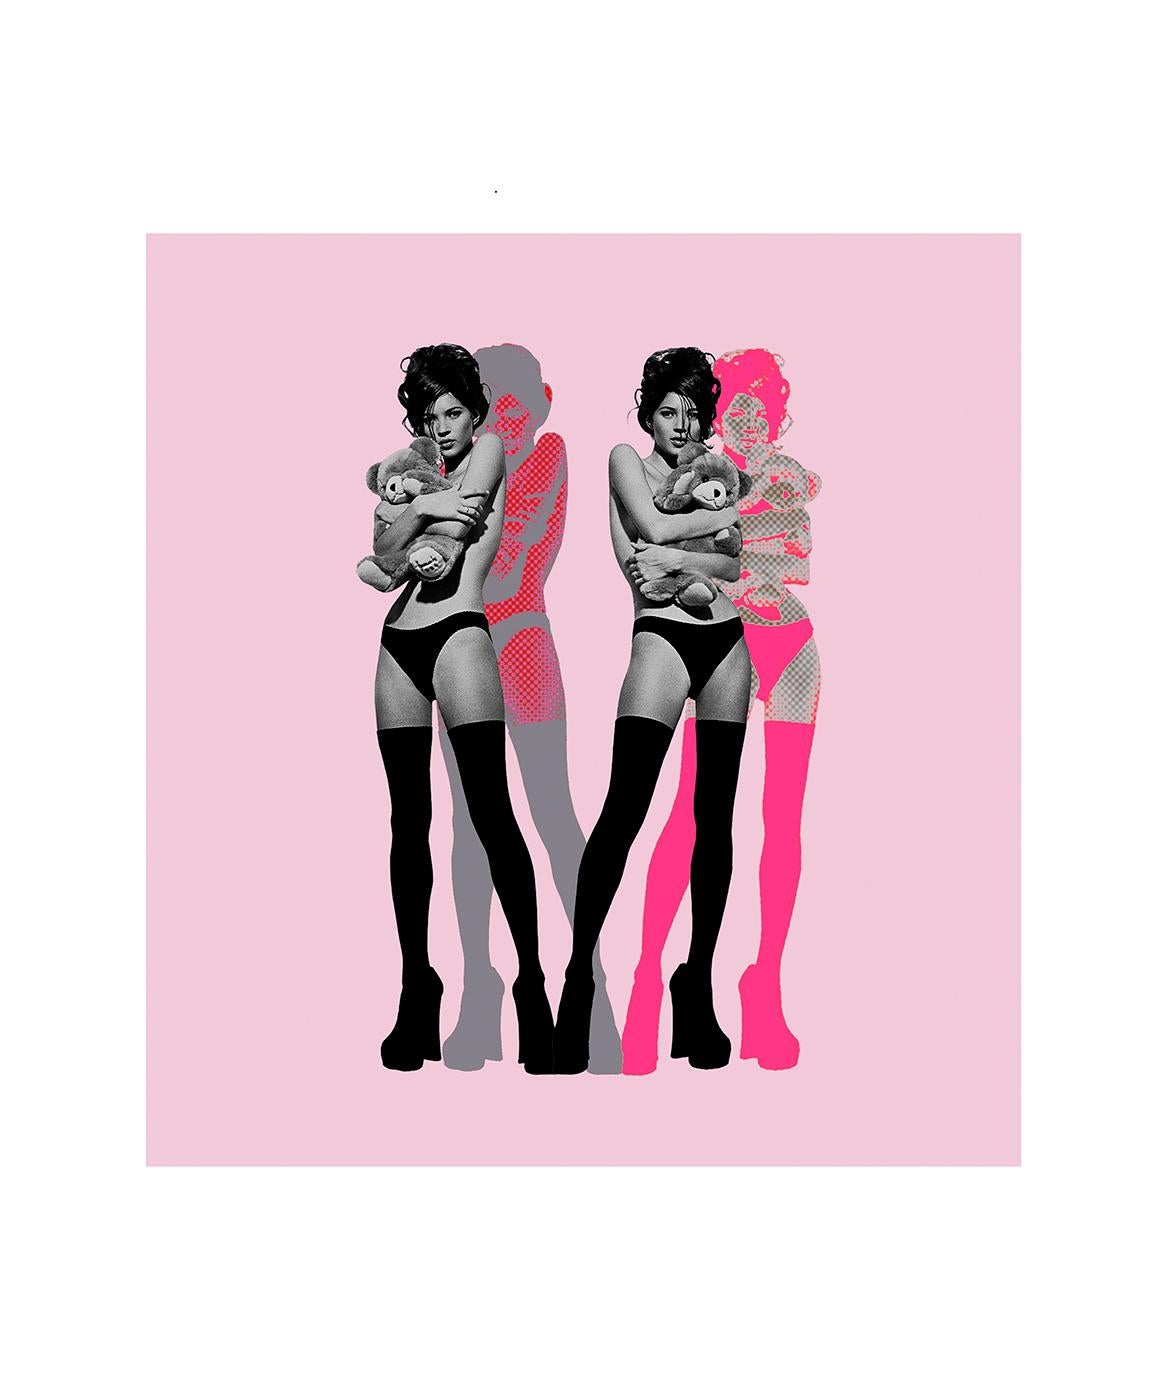 "Twin Kate Moss on Pink" Photography 40 x 36.5 in Edition of 25 by Kate Garner